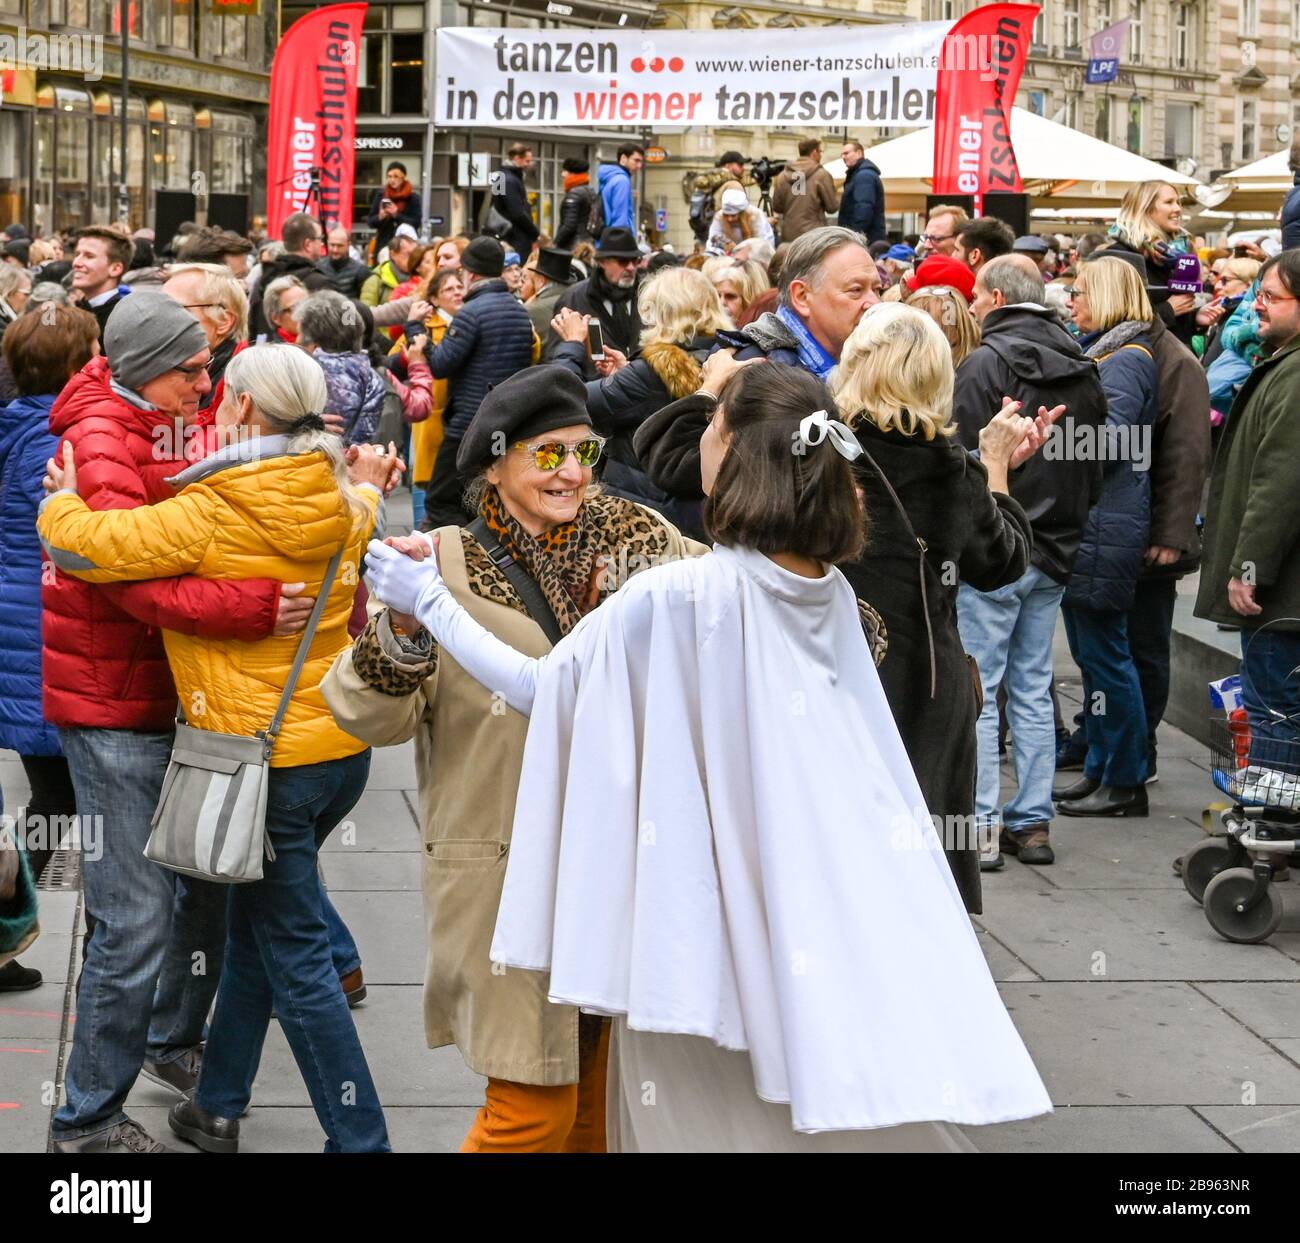 VIENNA, AUSTRIA - NOVEMBER 2019: People dancing the Danube waltz in a public gathering on a street in Vienna city centre. Stock Photo